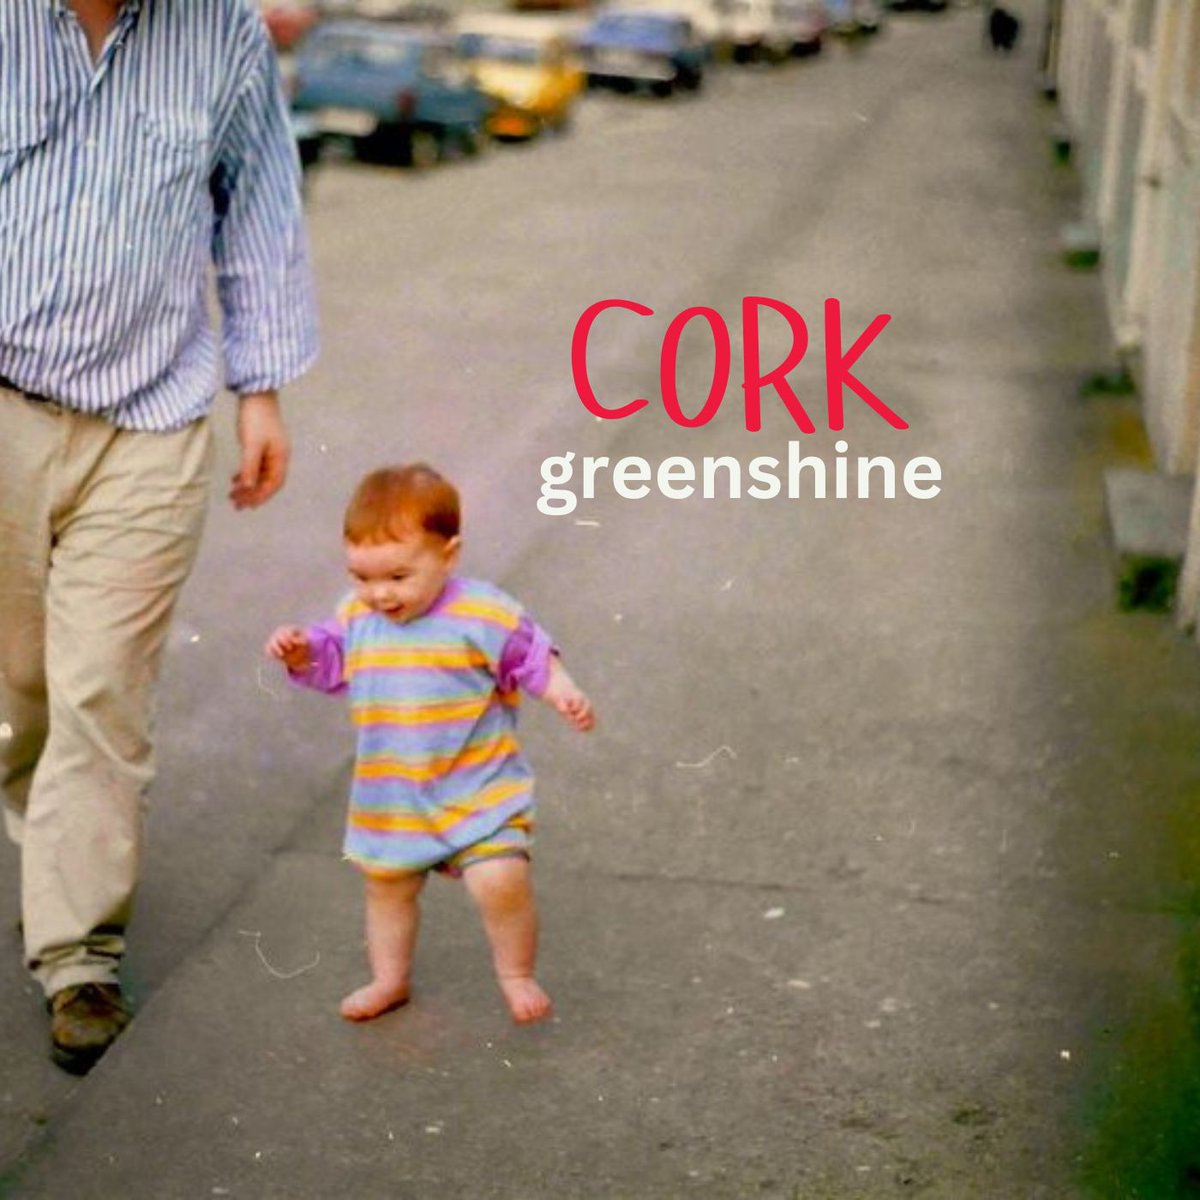 Wonderful support continues from around the country for our latest single 'CORK'. Tune in to @CharityRadio from 4pm and @carlow_fm from 5pm for a chance to hear it before its greenshine.bandcamp.com release on May 22!Thanks so much to Paul and Shauna and all who are spinning CORK